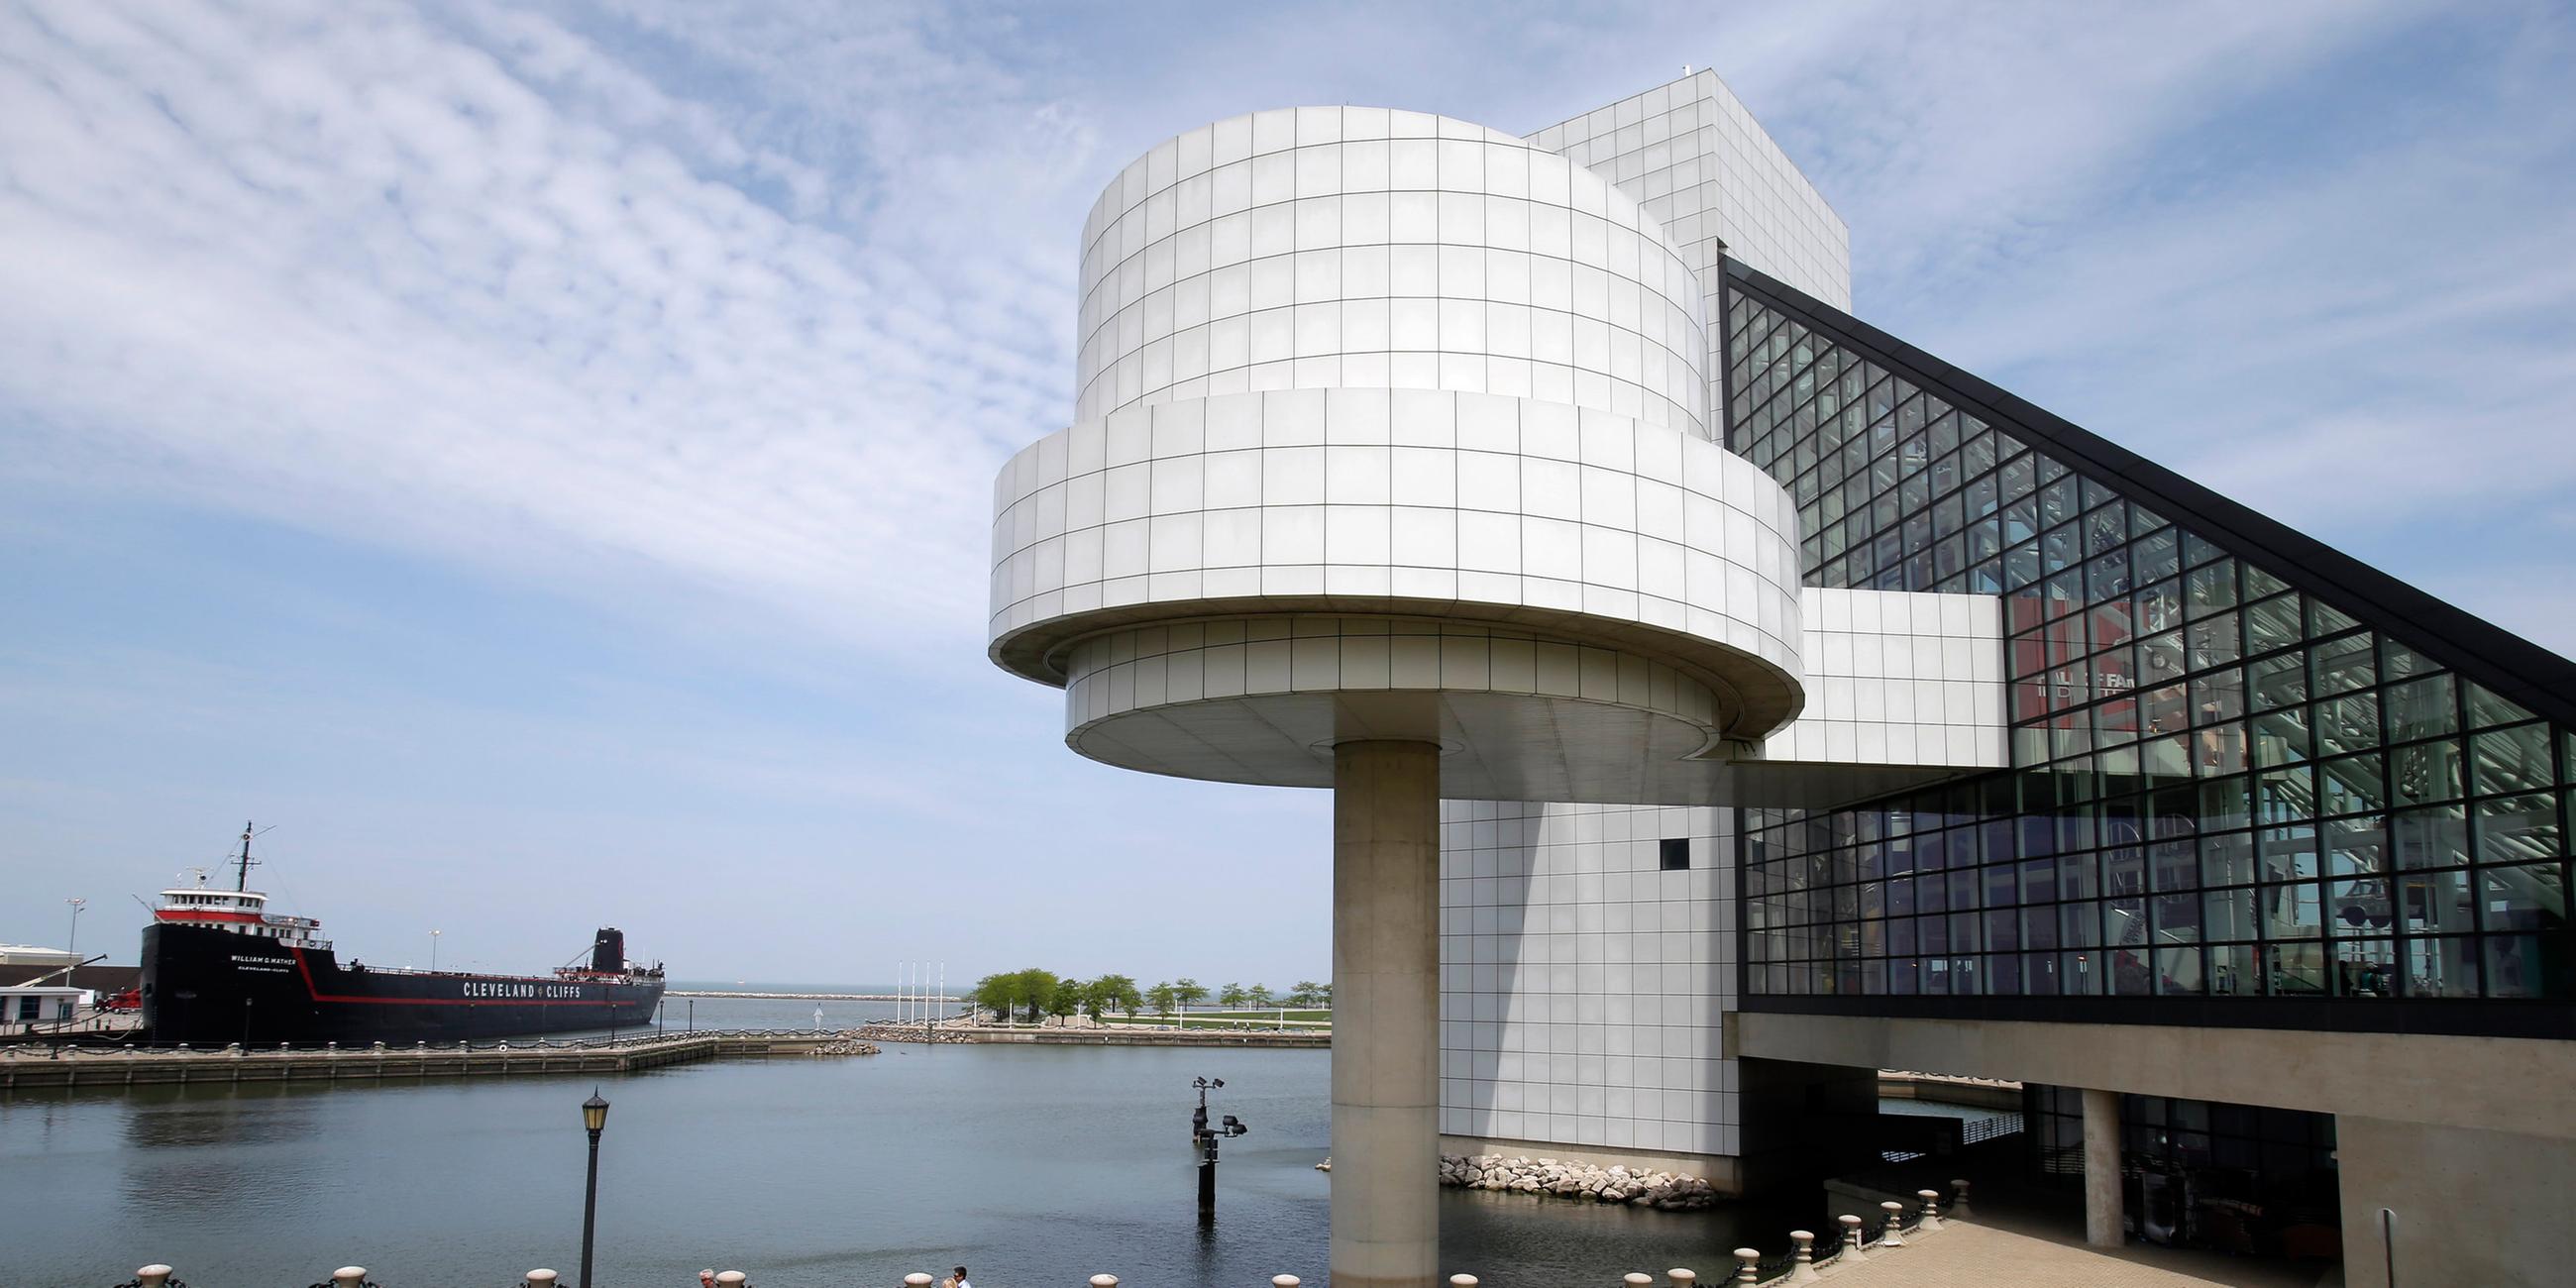 Rock and Roll Hall of Fame in Cleveland